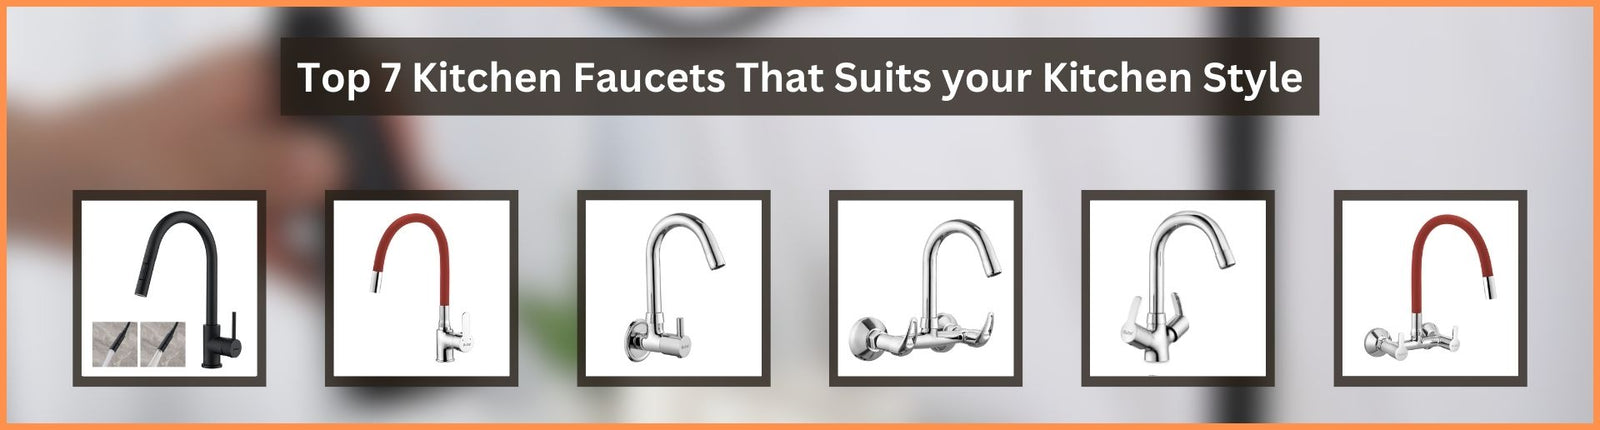 Top 7 Kitchen Faucets That Suits Your Kitchen Style